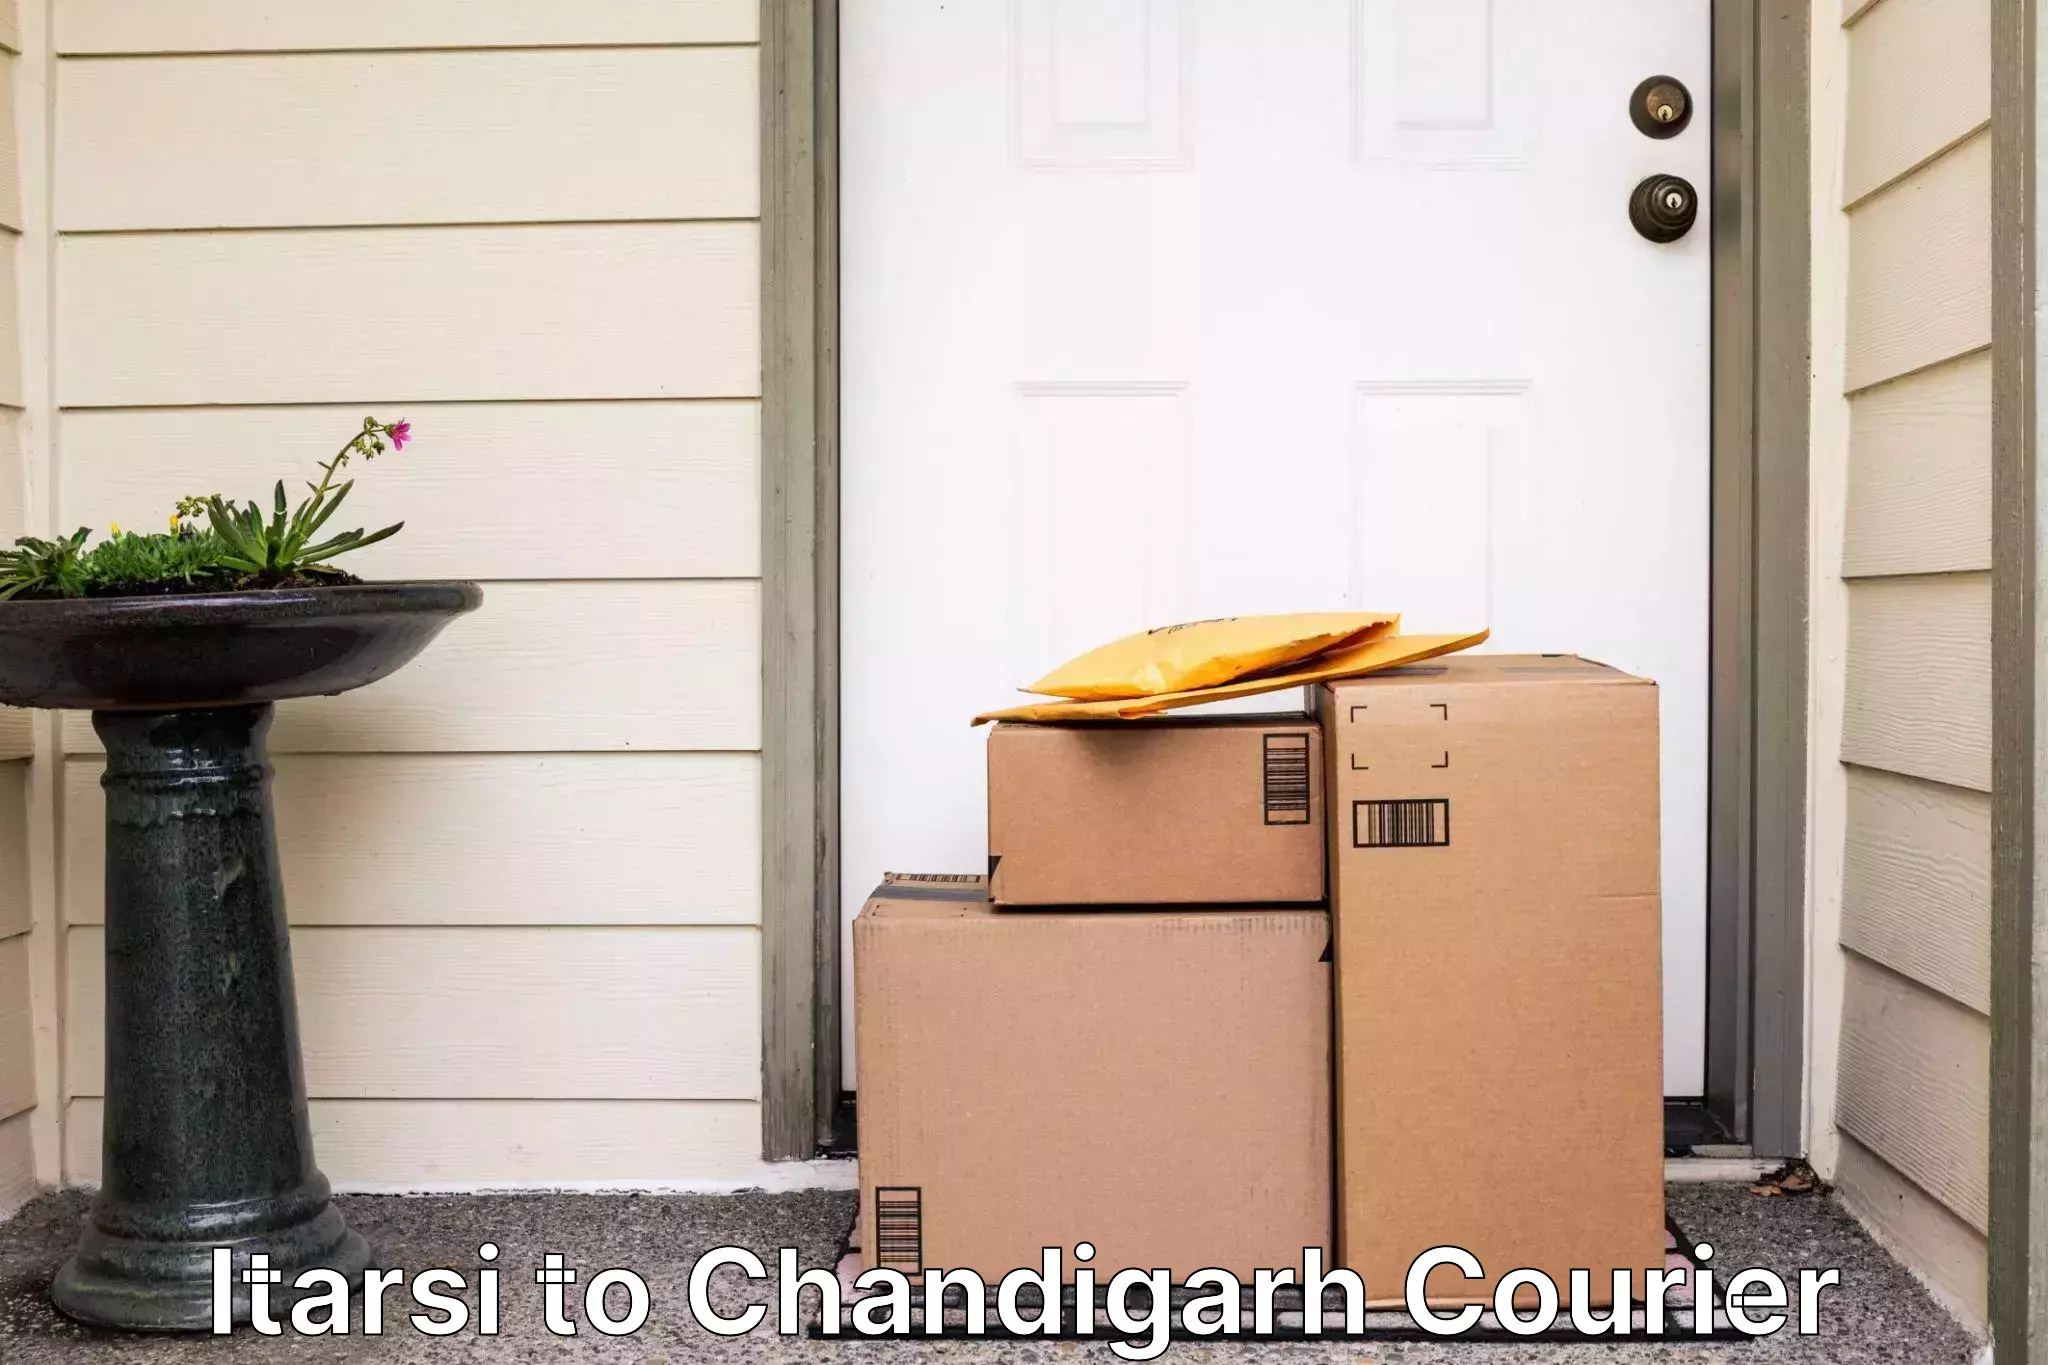 Full-service courier options Itarsi to Chandigarh